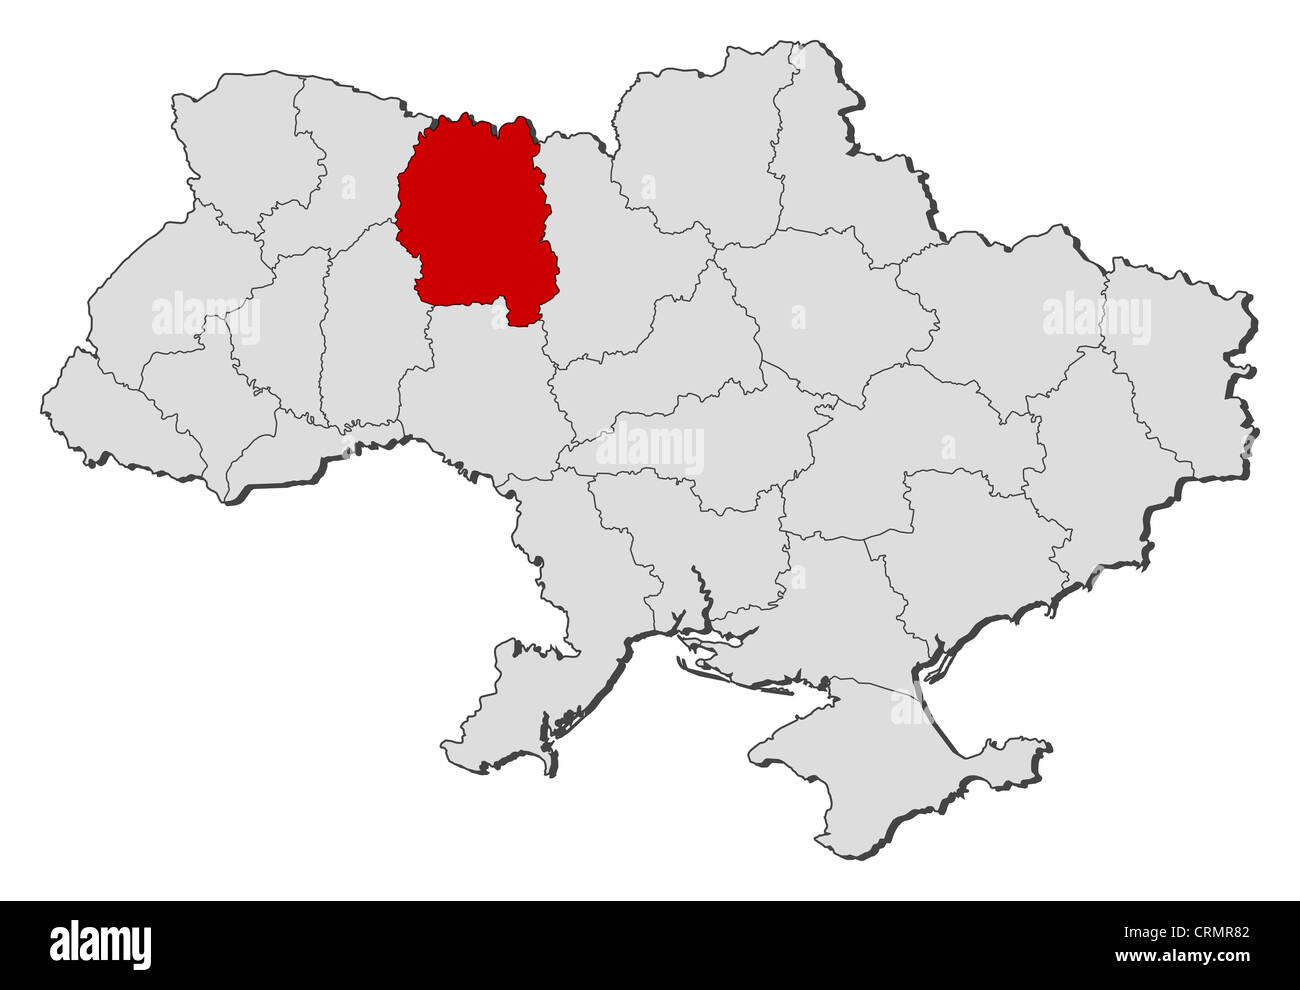 Political map of Ukraine with the several oblasts where Zhytomyr is highlighted. Stock Photo